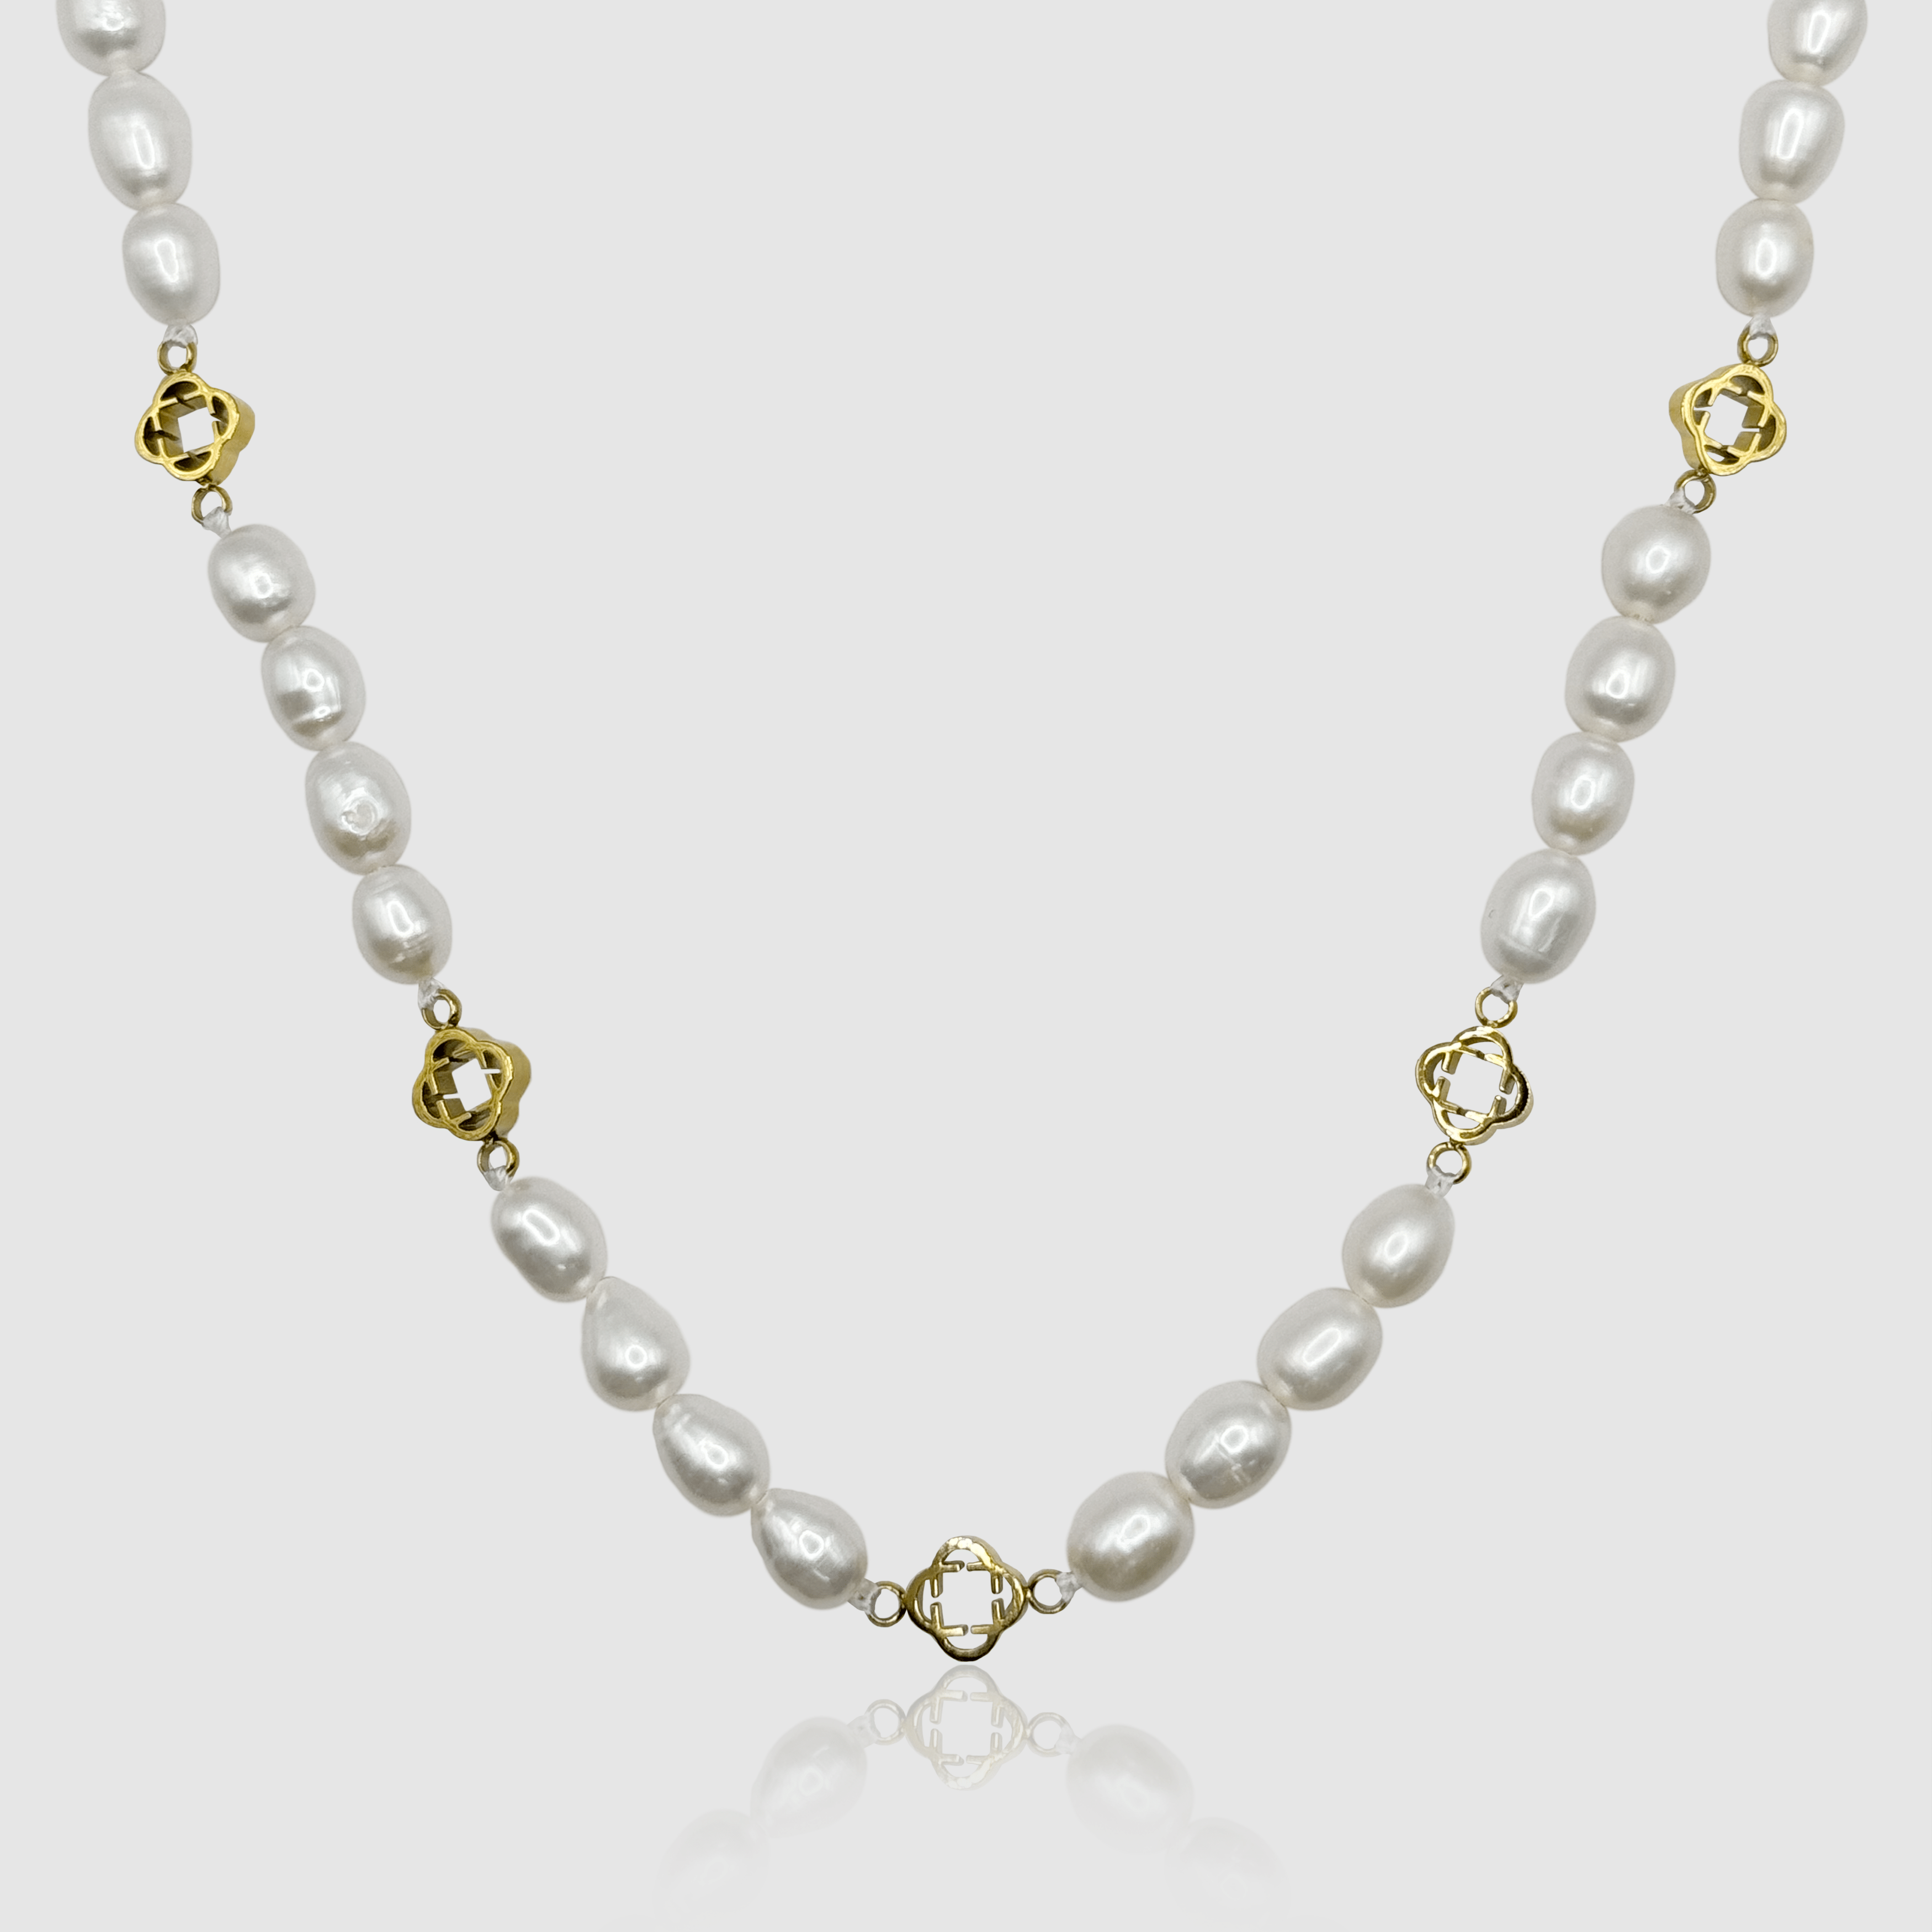 Classic white pearl necklace adorned with luxurious gold details, a timeless accessory for any man's wardrobe.